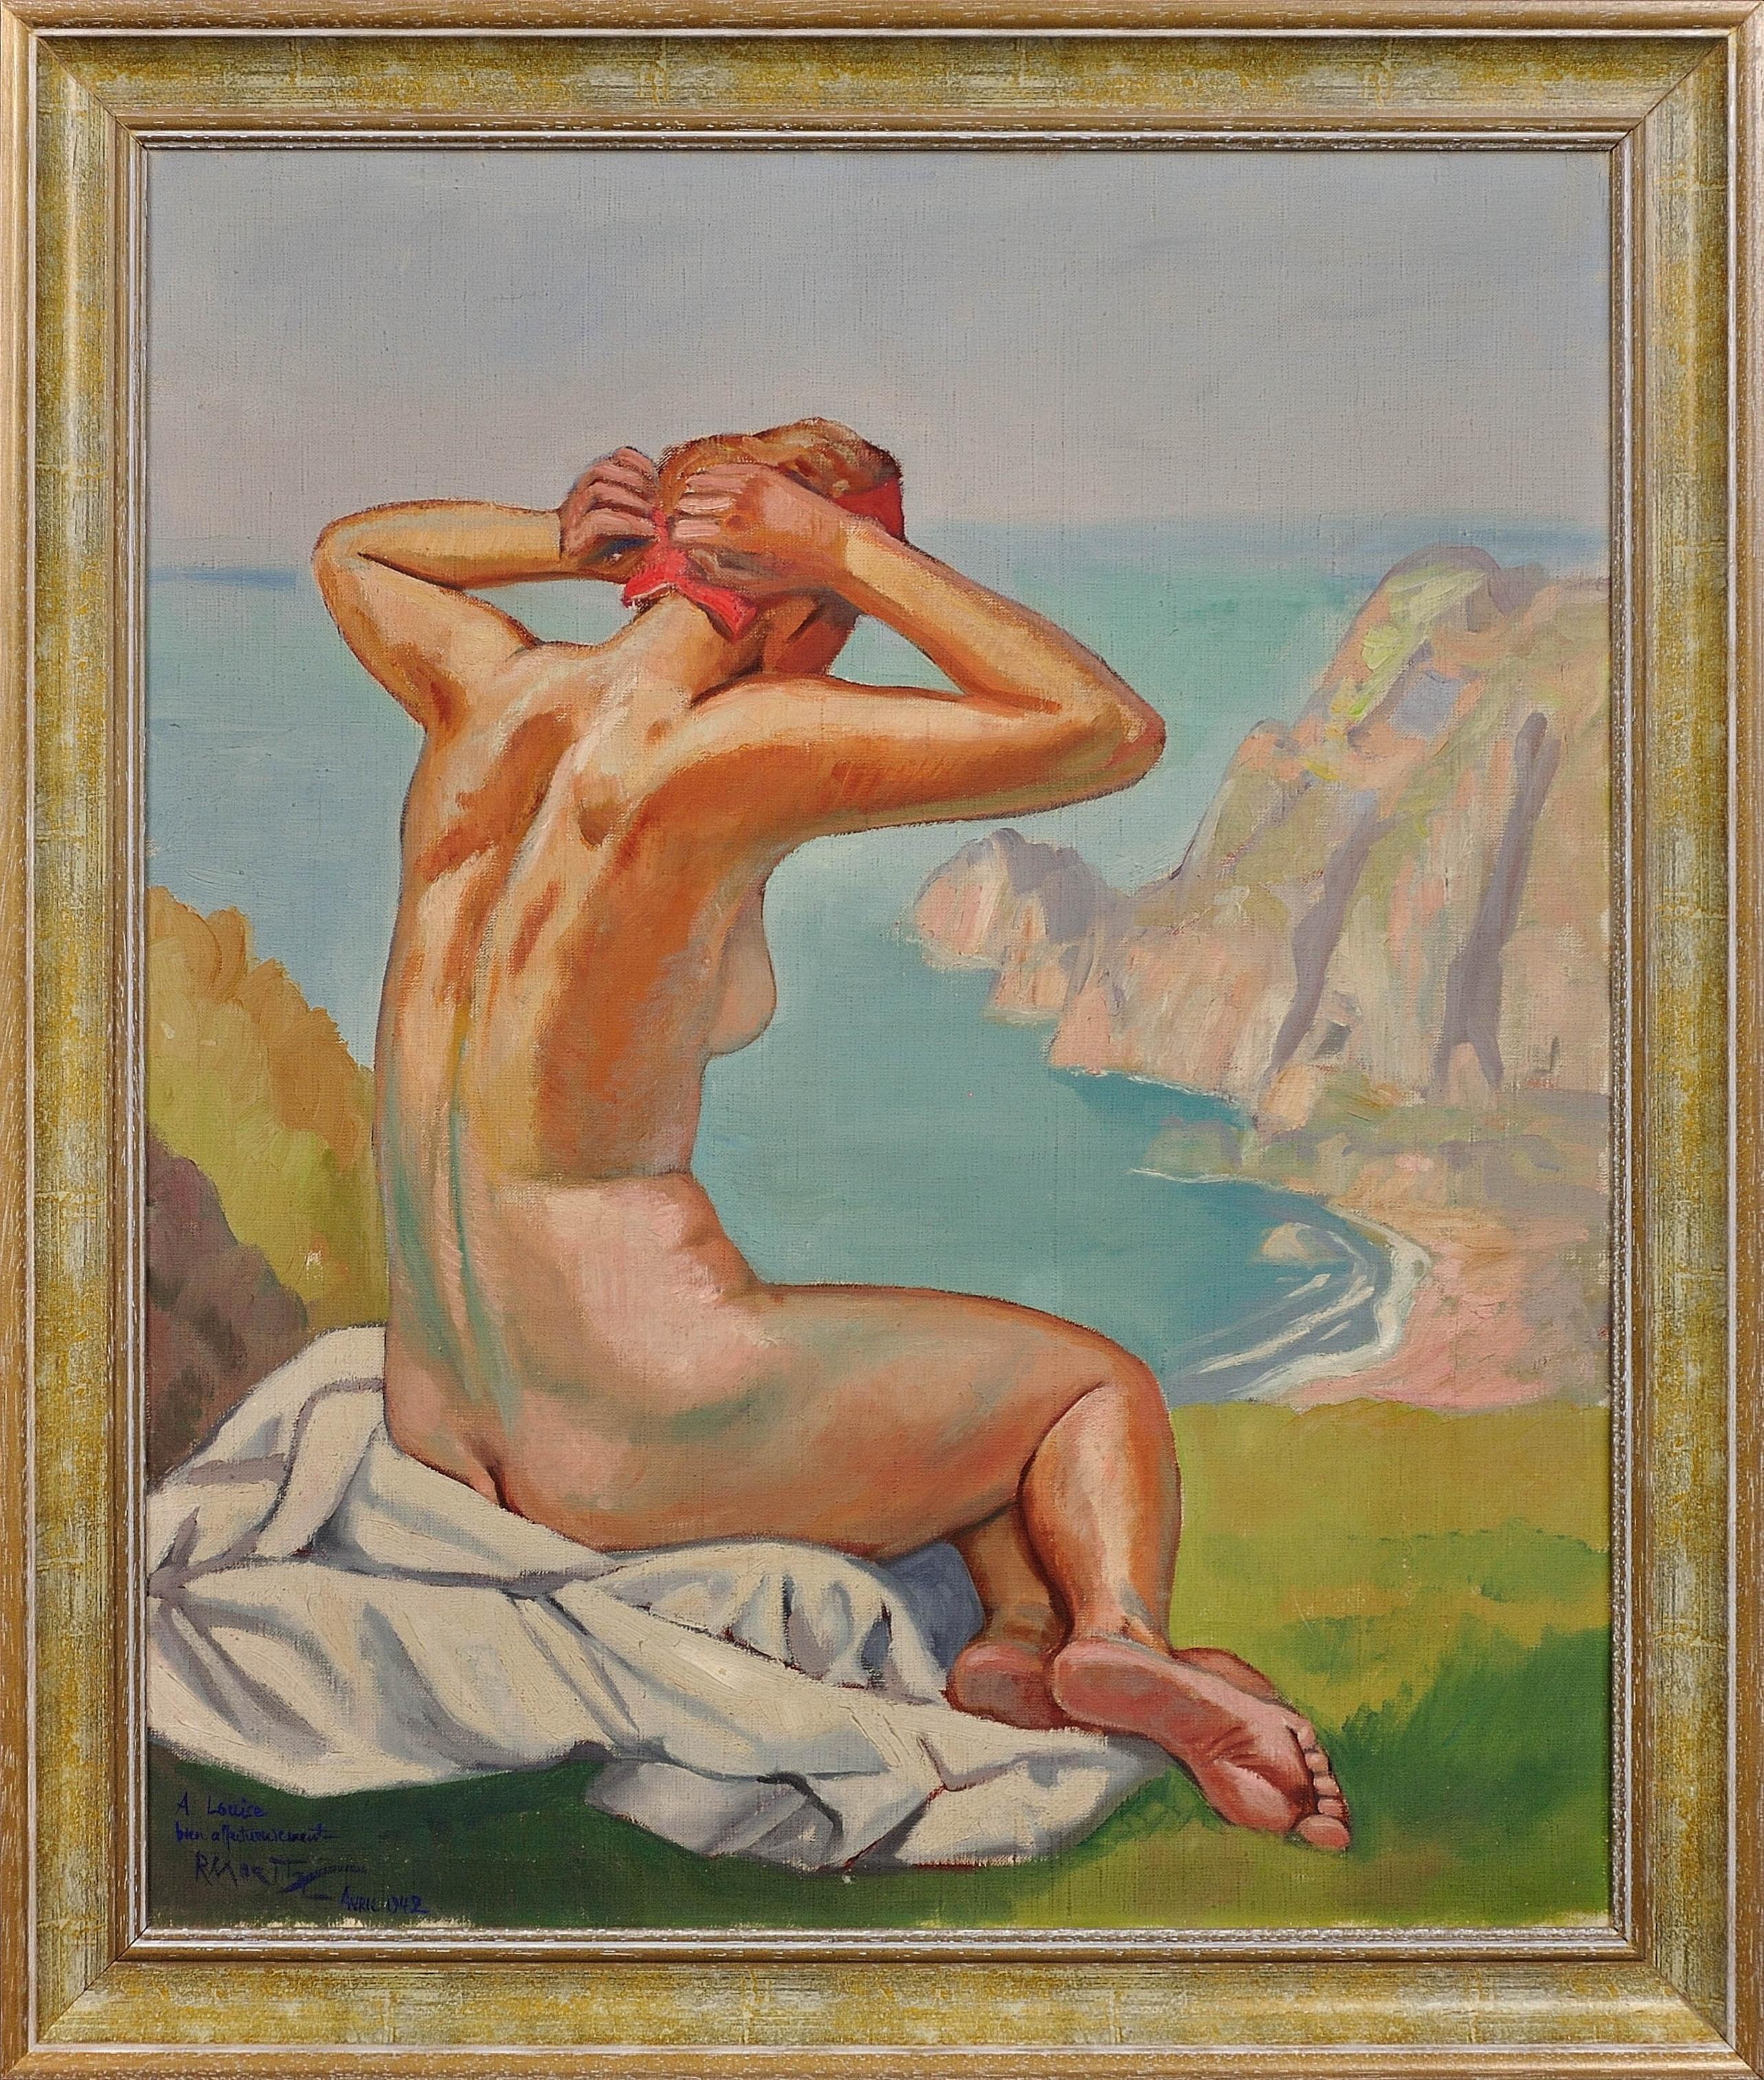 Raymond Moritz Nude Painting - The Lady of the Cliffs, 1927. Nude Clifftop Sunbathing. French Arts Décoratifs.